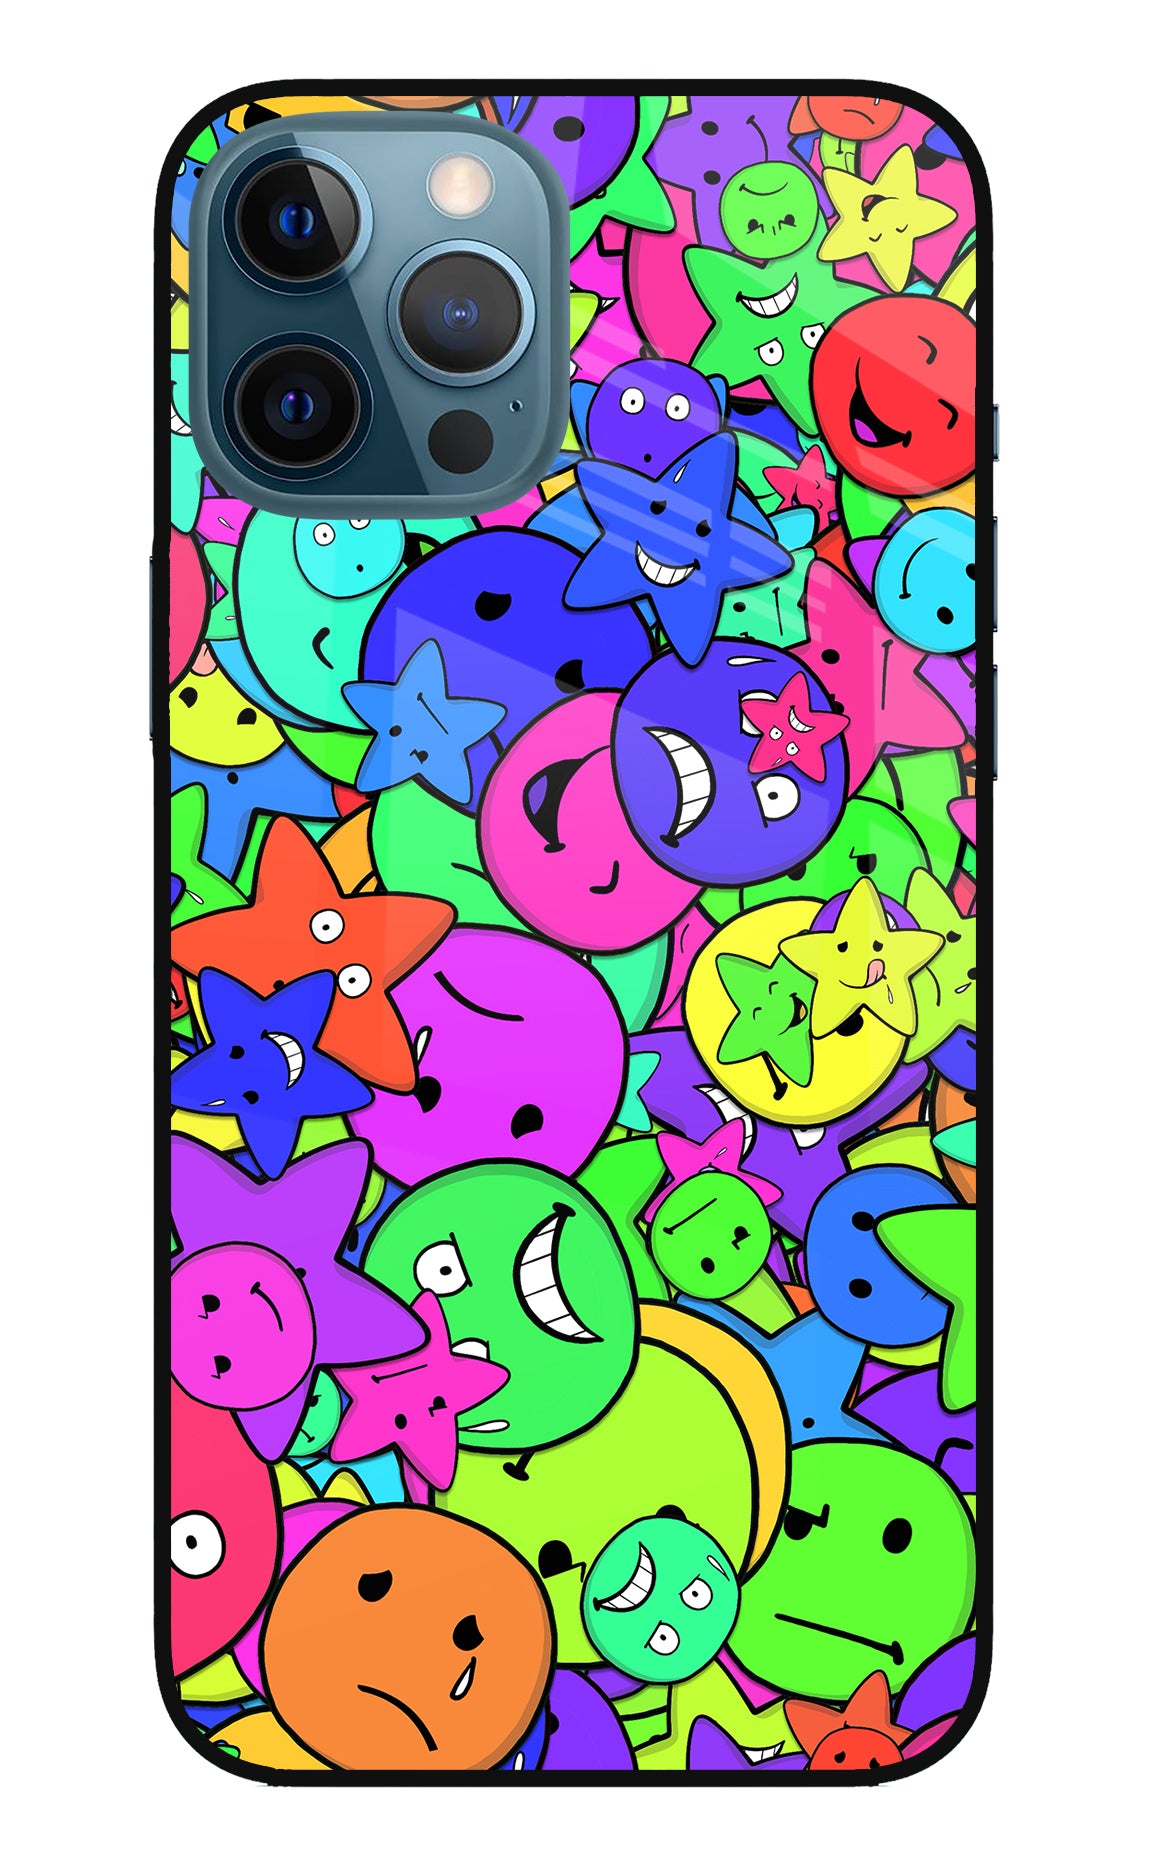 Fun Doodle iPhone 12 Pro Max Back Cover